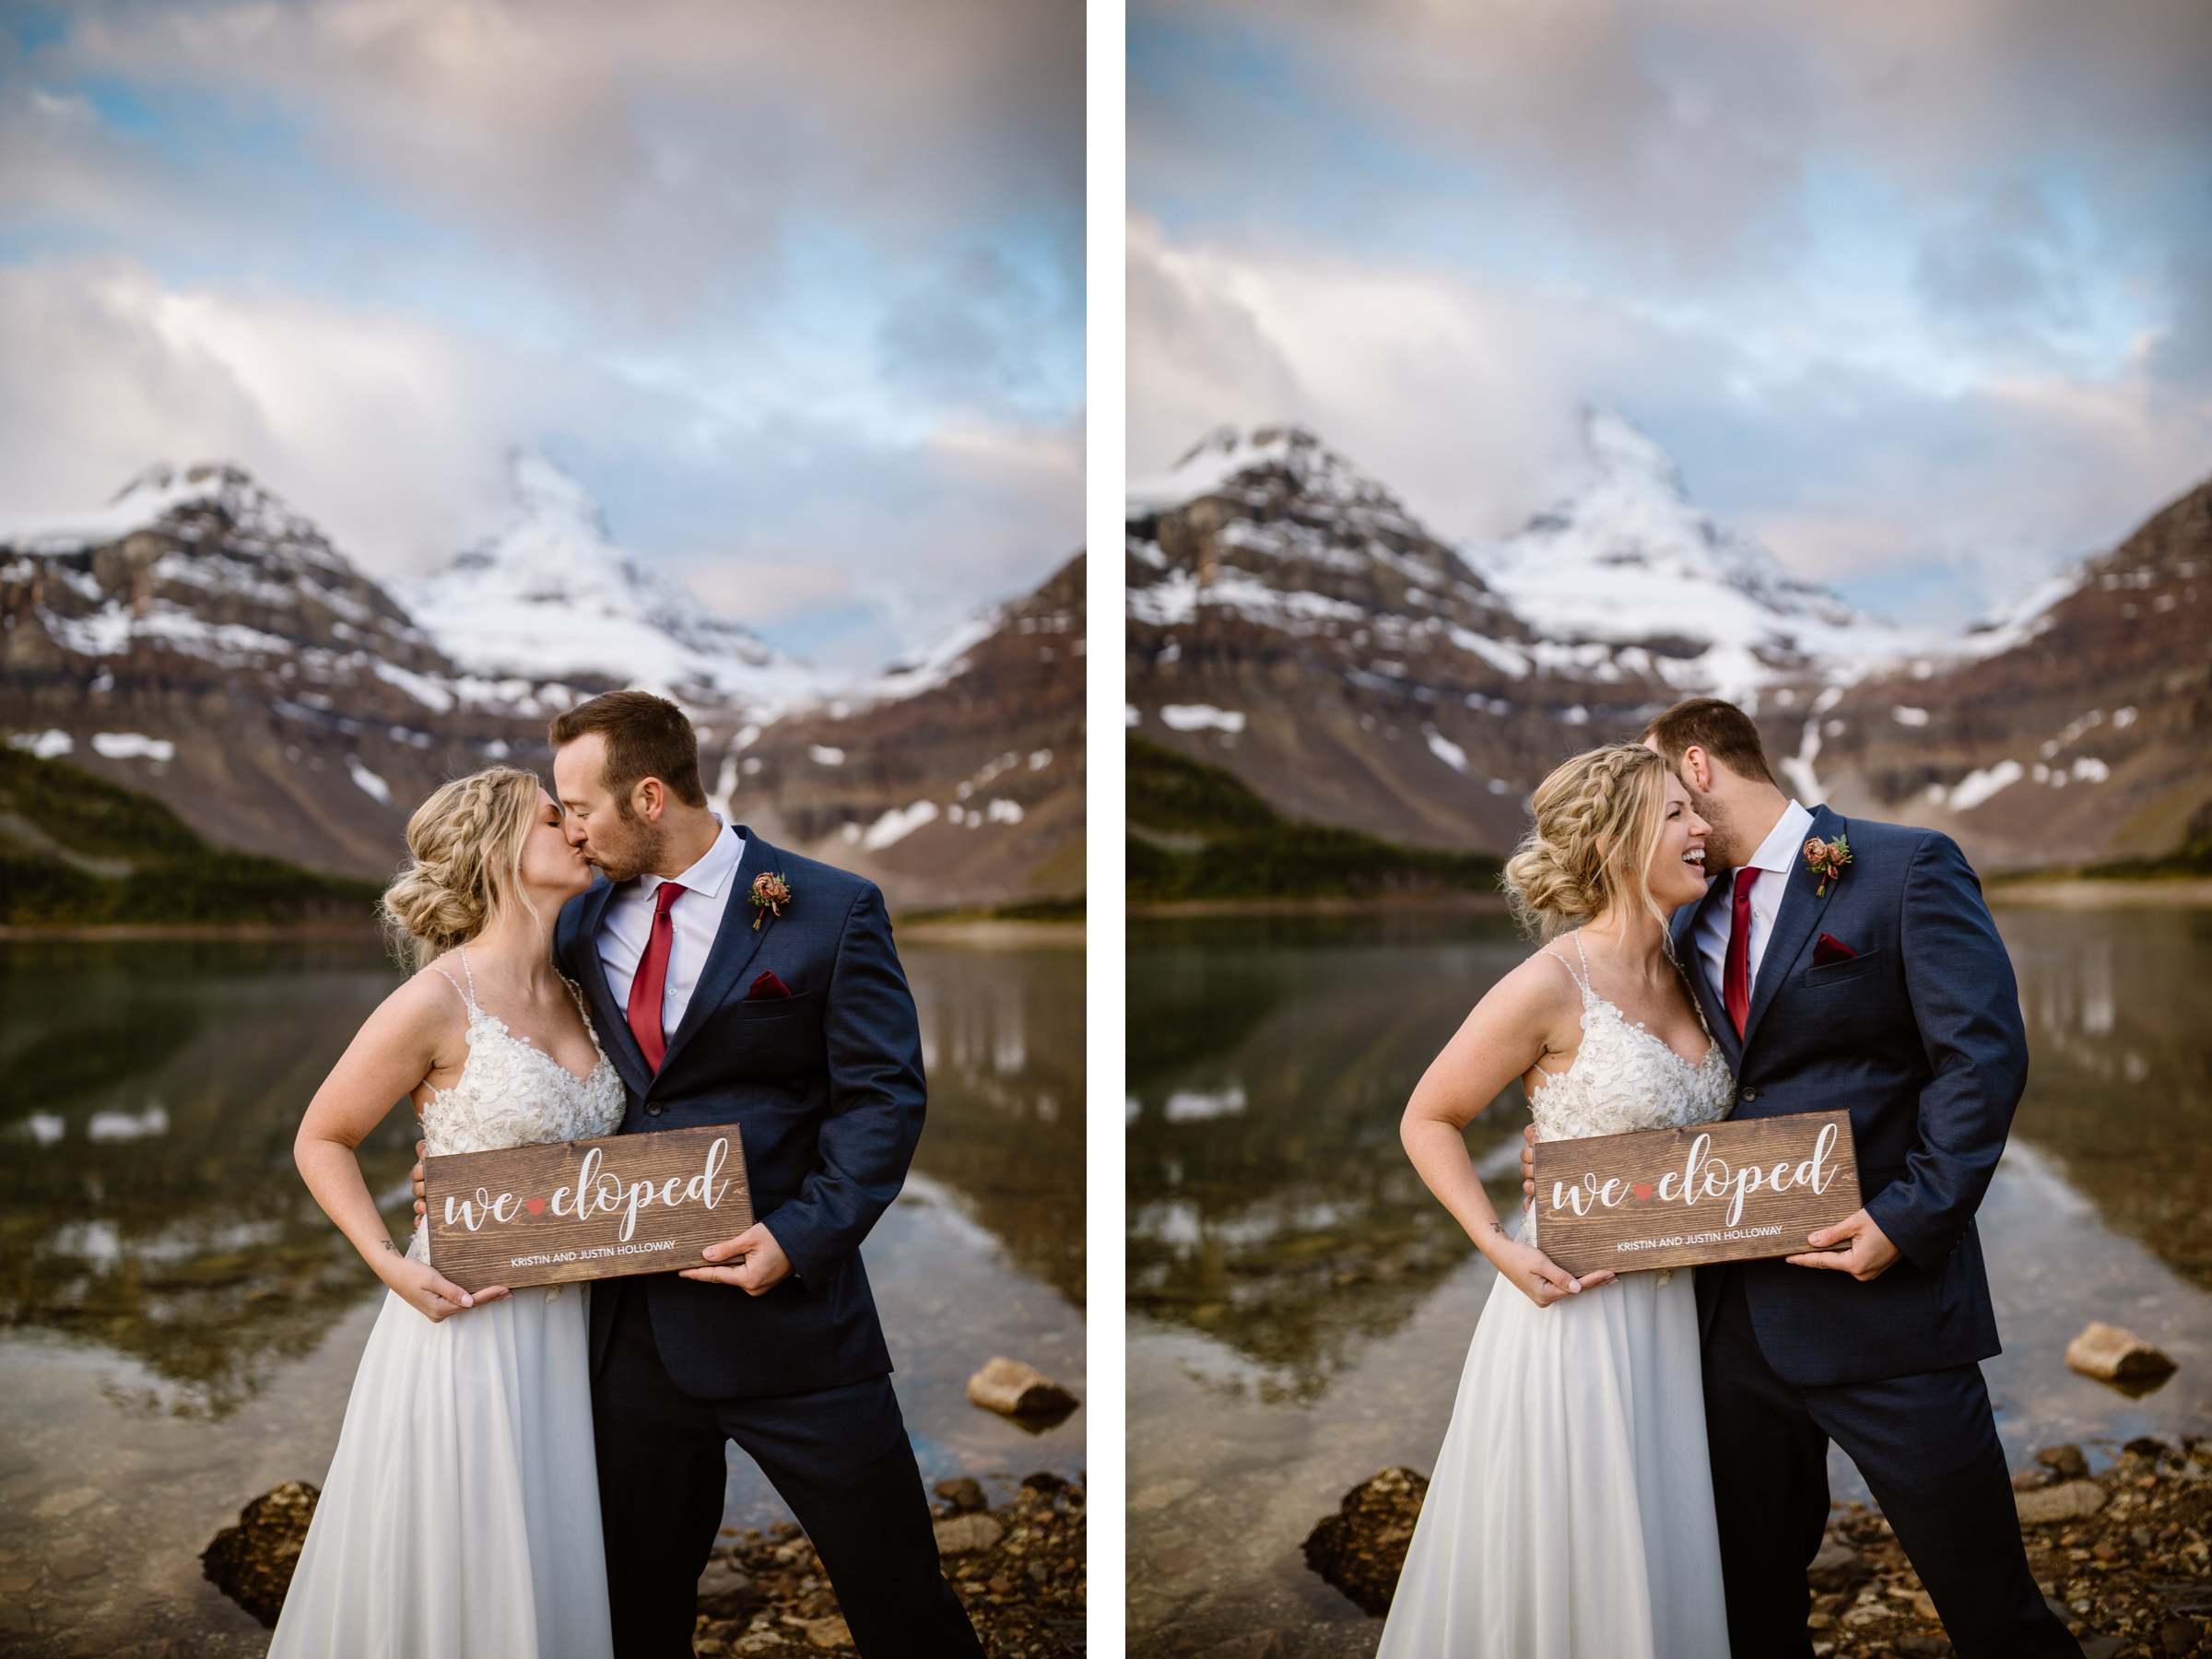 Mount Assiniboine Elopement Photographers at a Backcountry Lodge - Photo 57